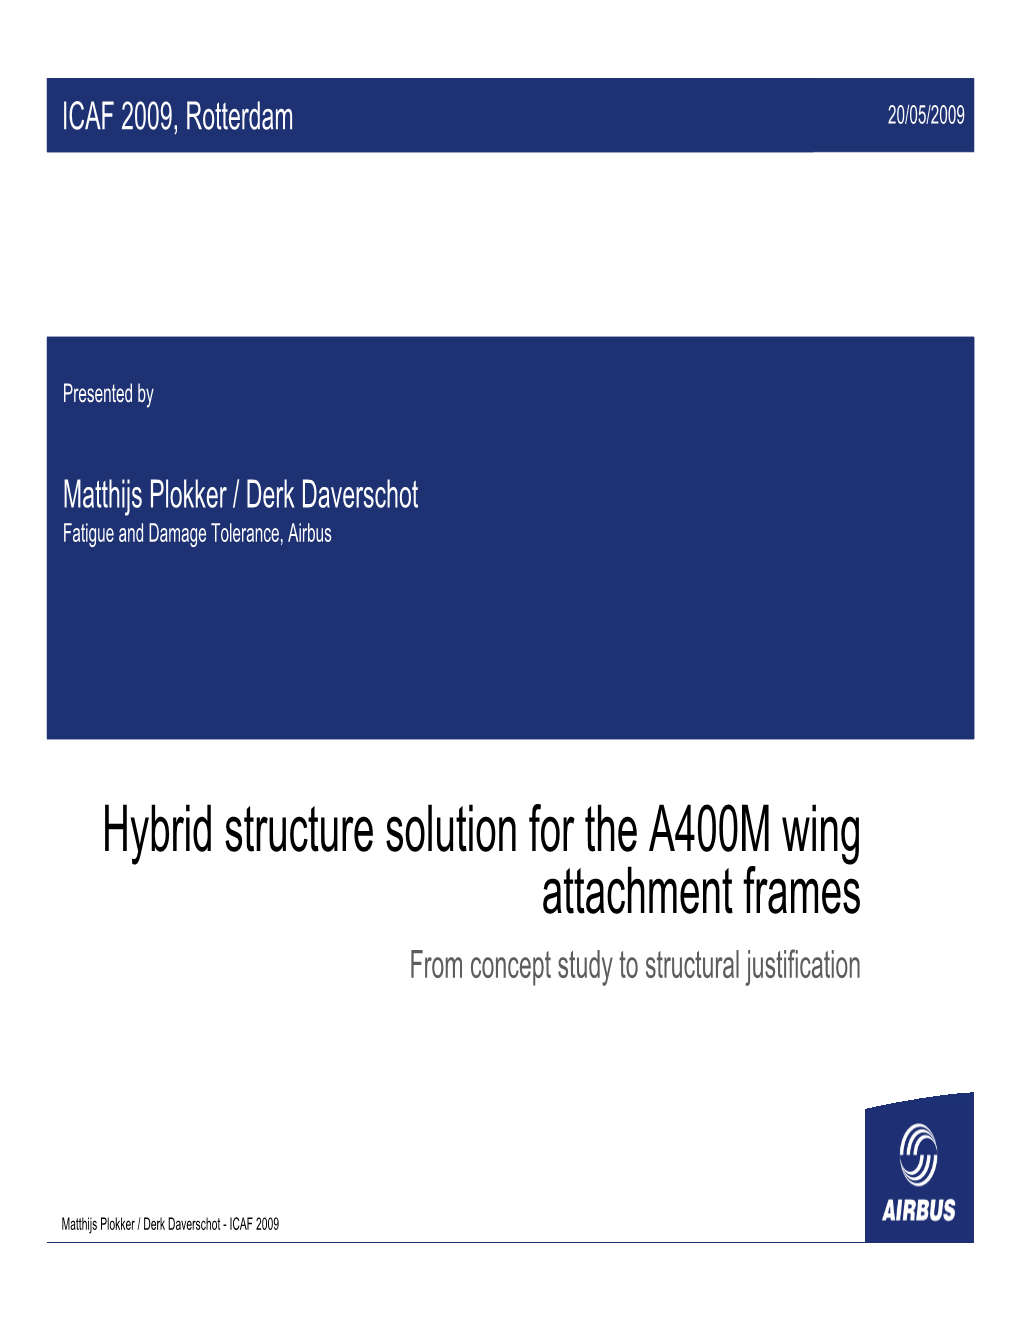 Hybrid Structure Solution for the A400M Wing Attachment Frames from Concept Study to Structural Justification